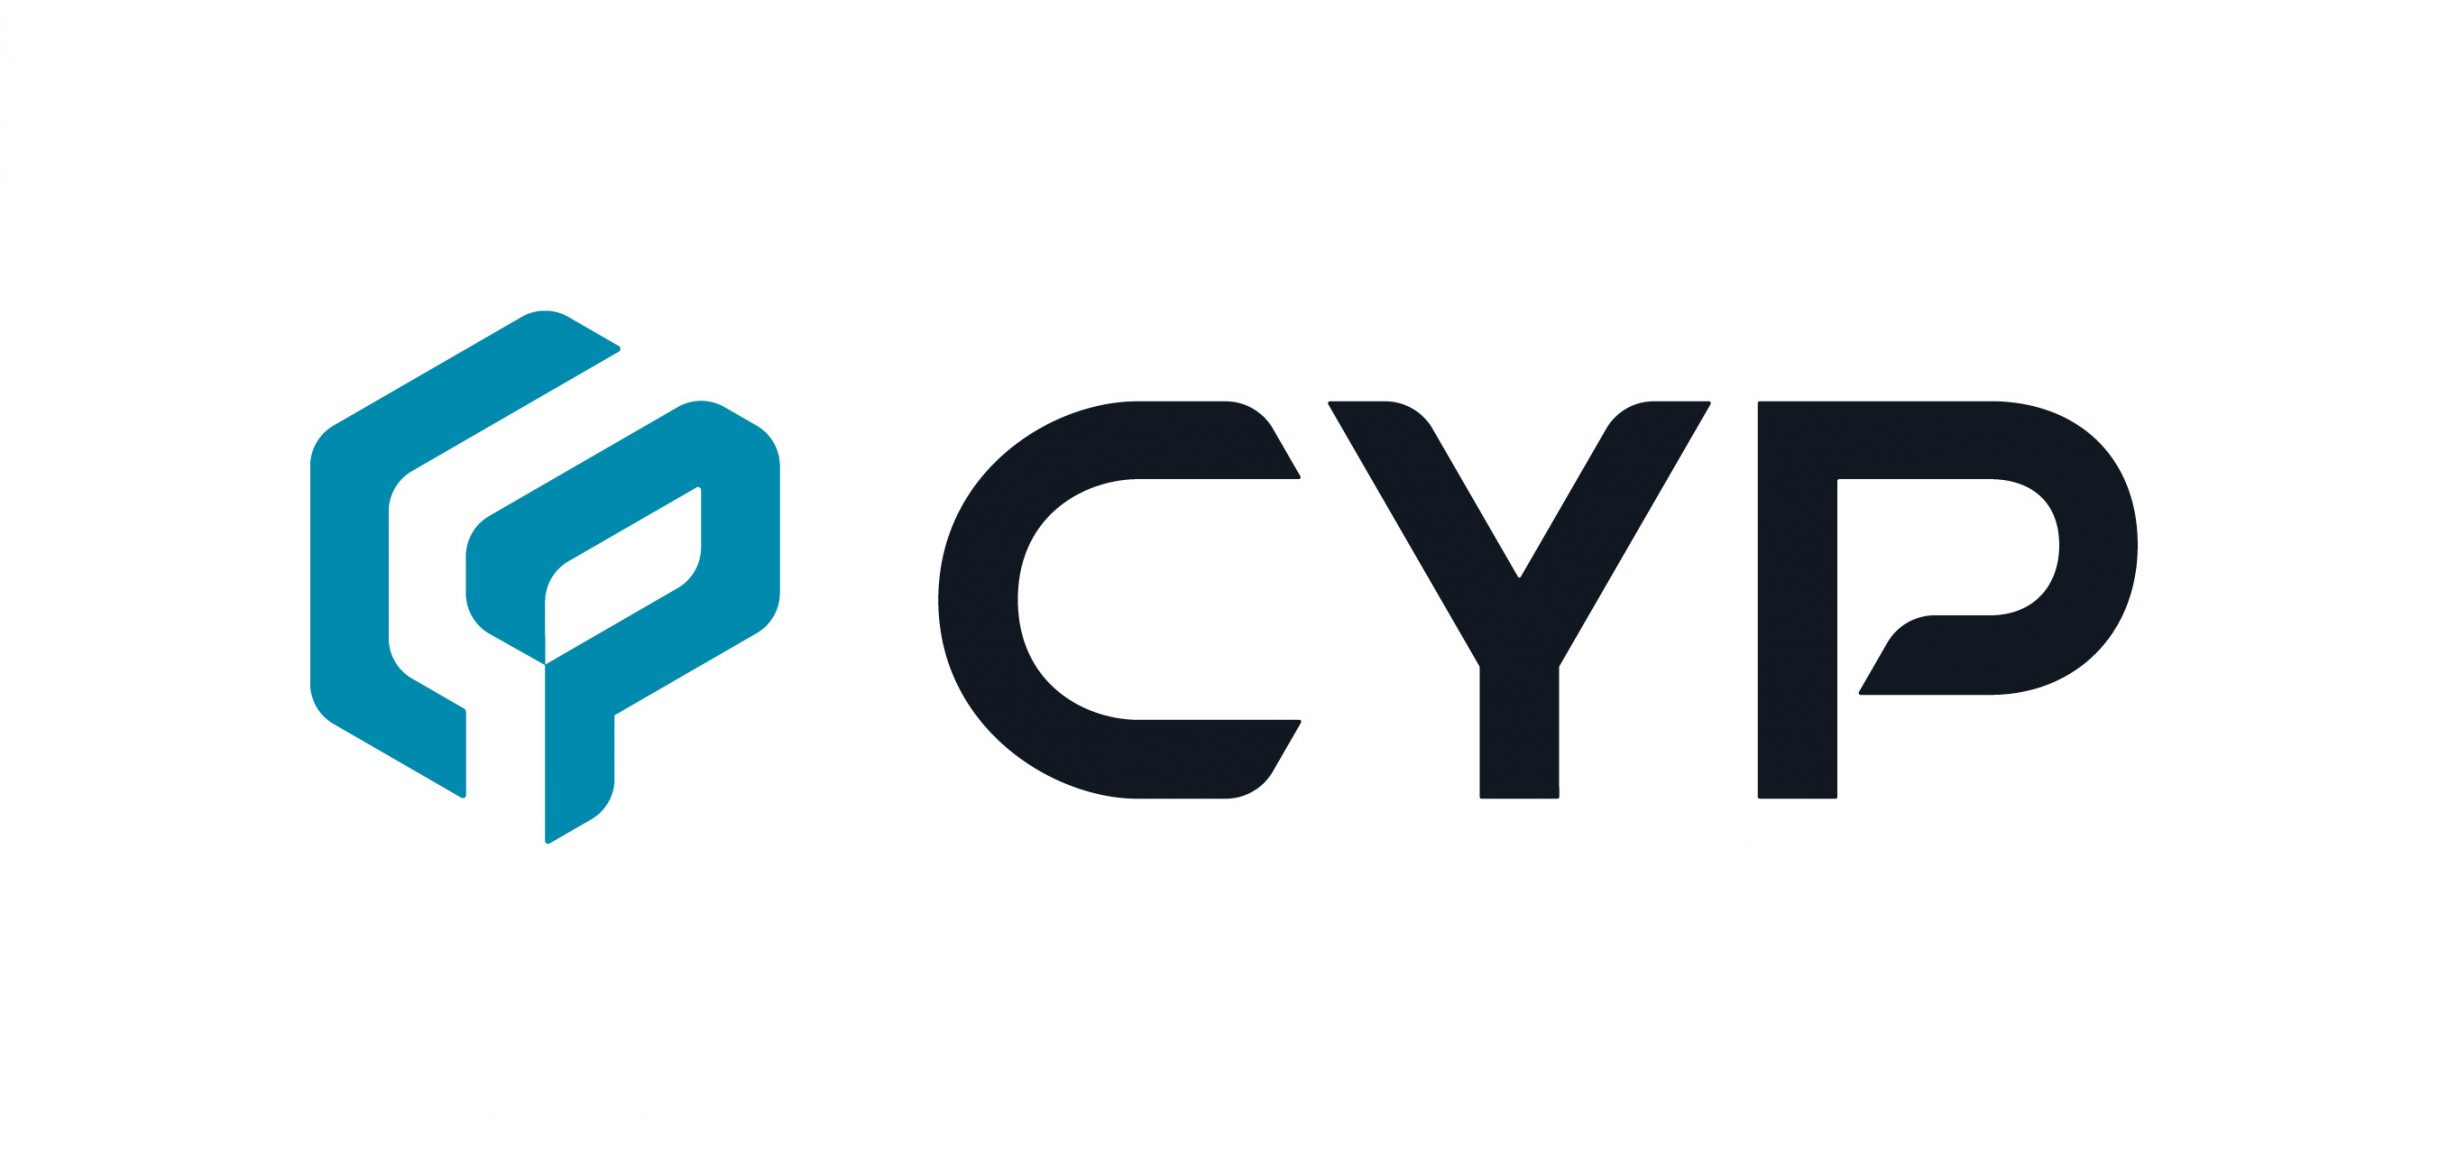 Cypress Technology licenses Dante AV for a new family of extenders, expanding the breadth of commercially available products with Dante video.